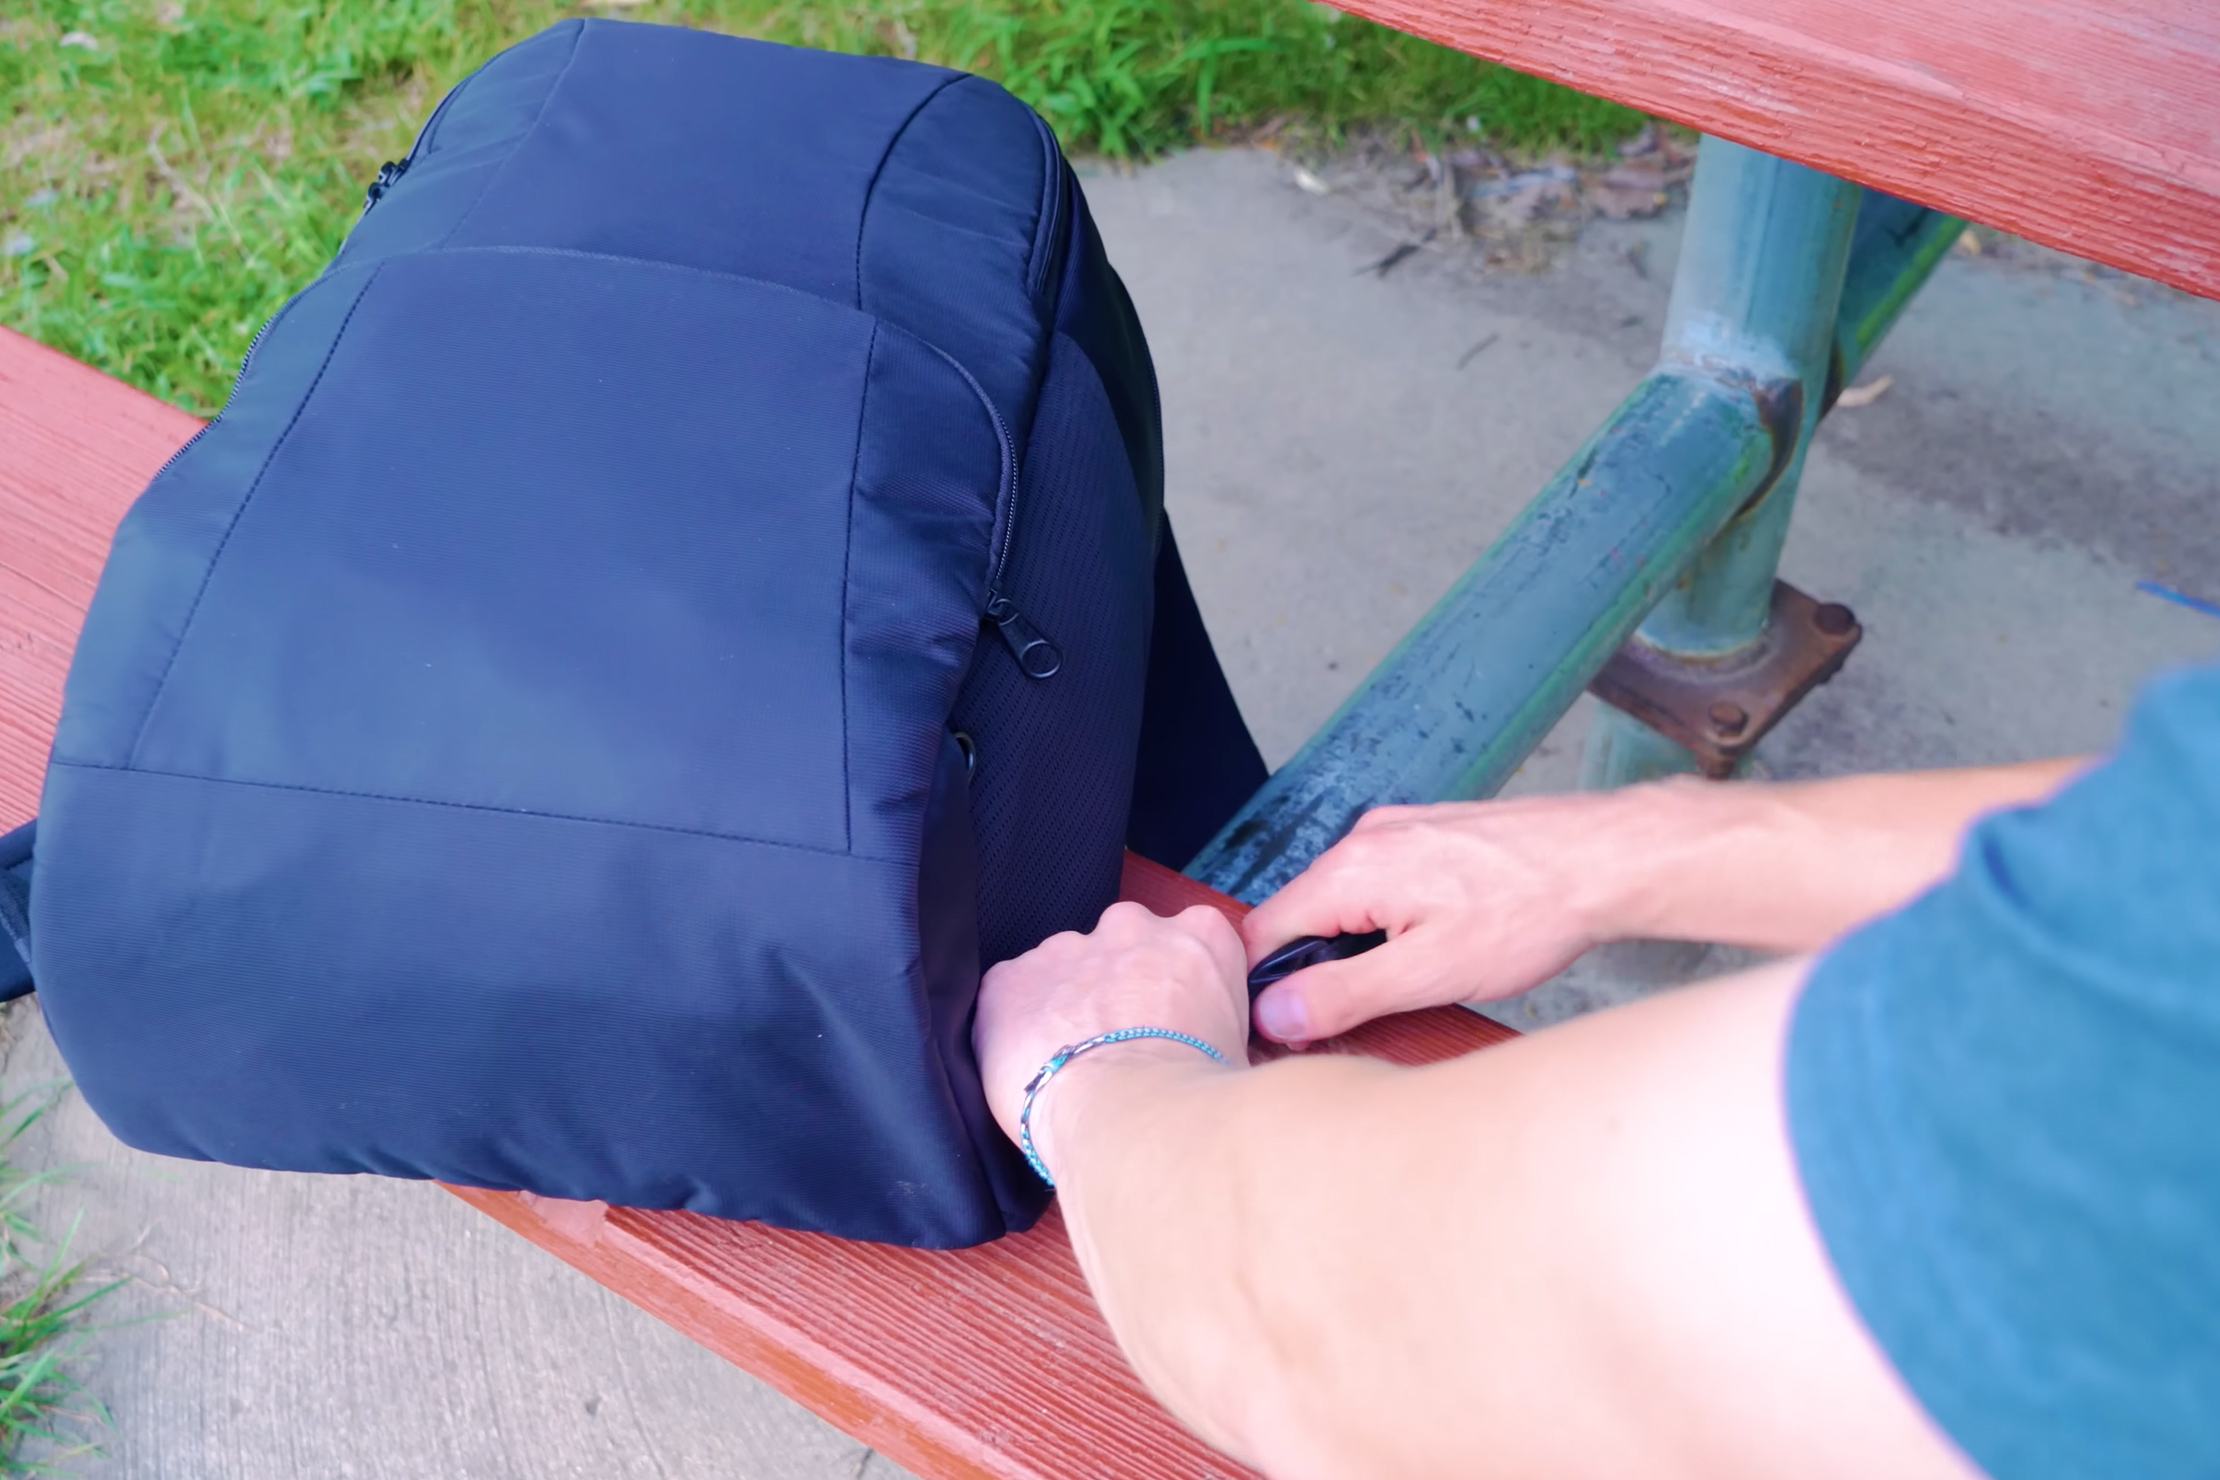 Best Anti-Theft Bags | Testing the anti-theft features.